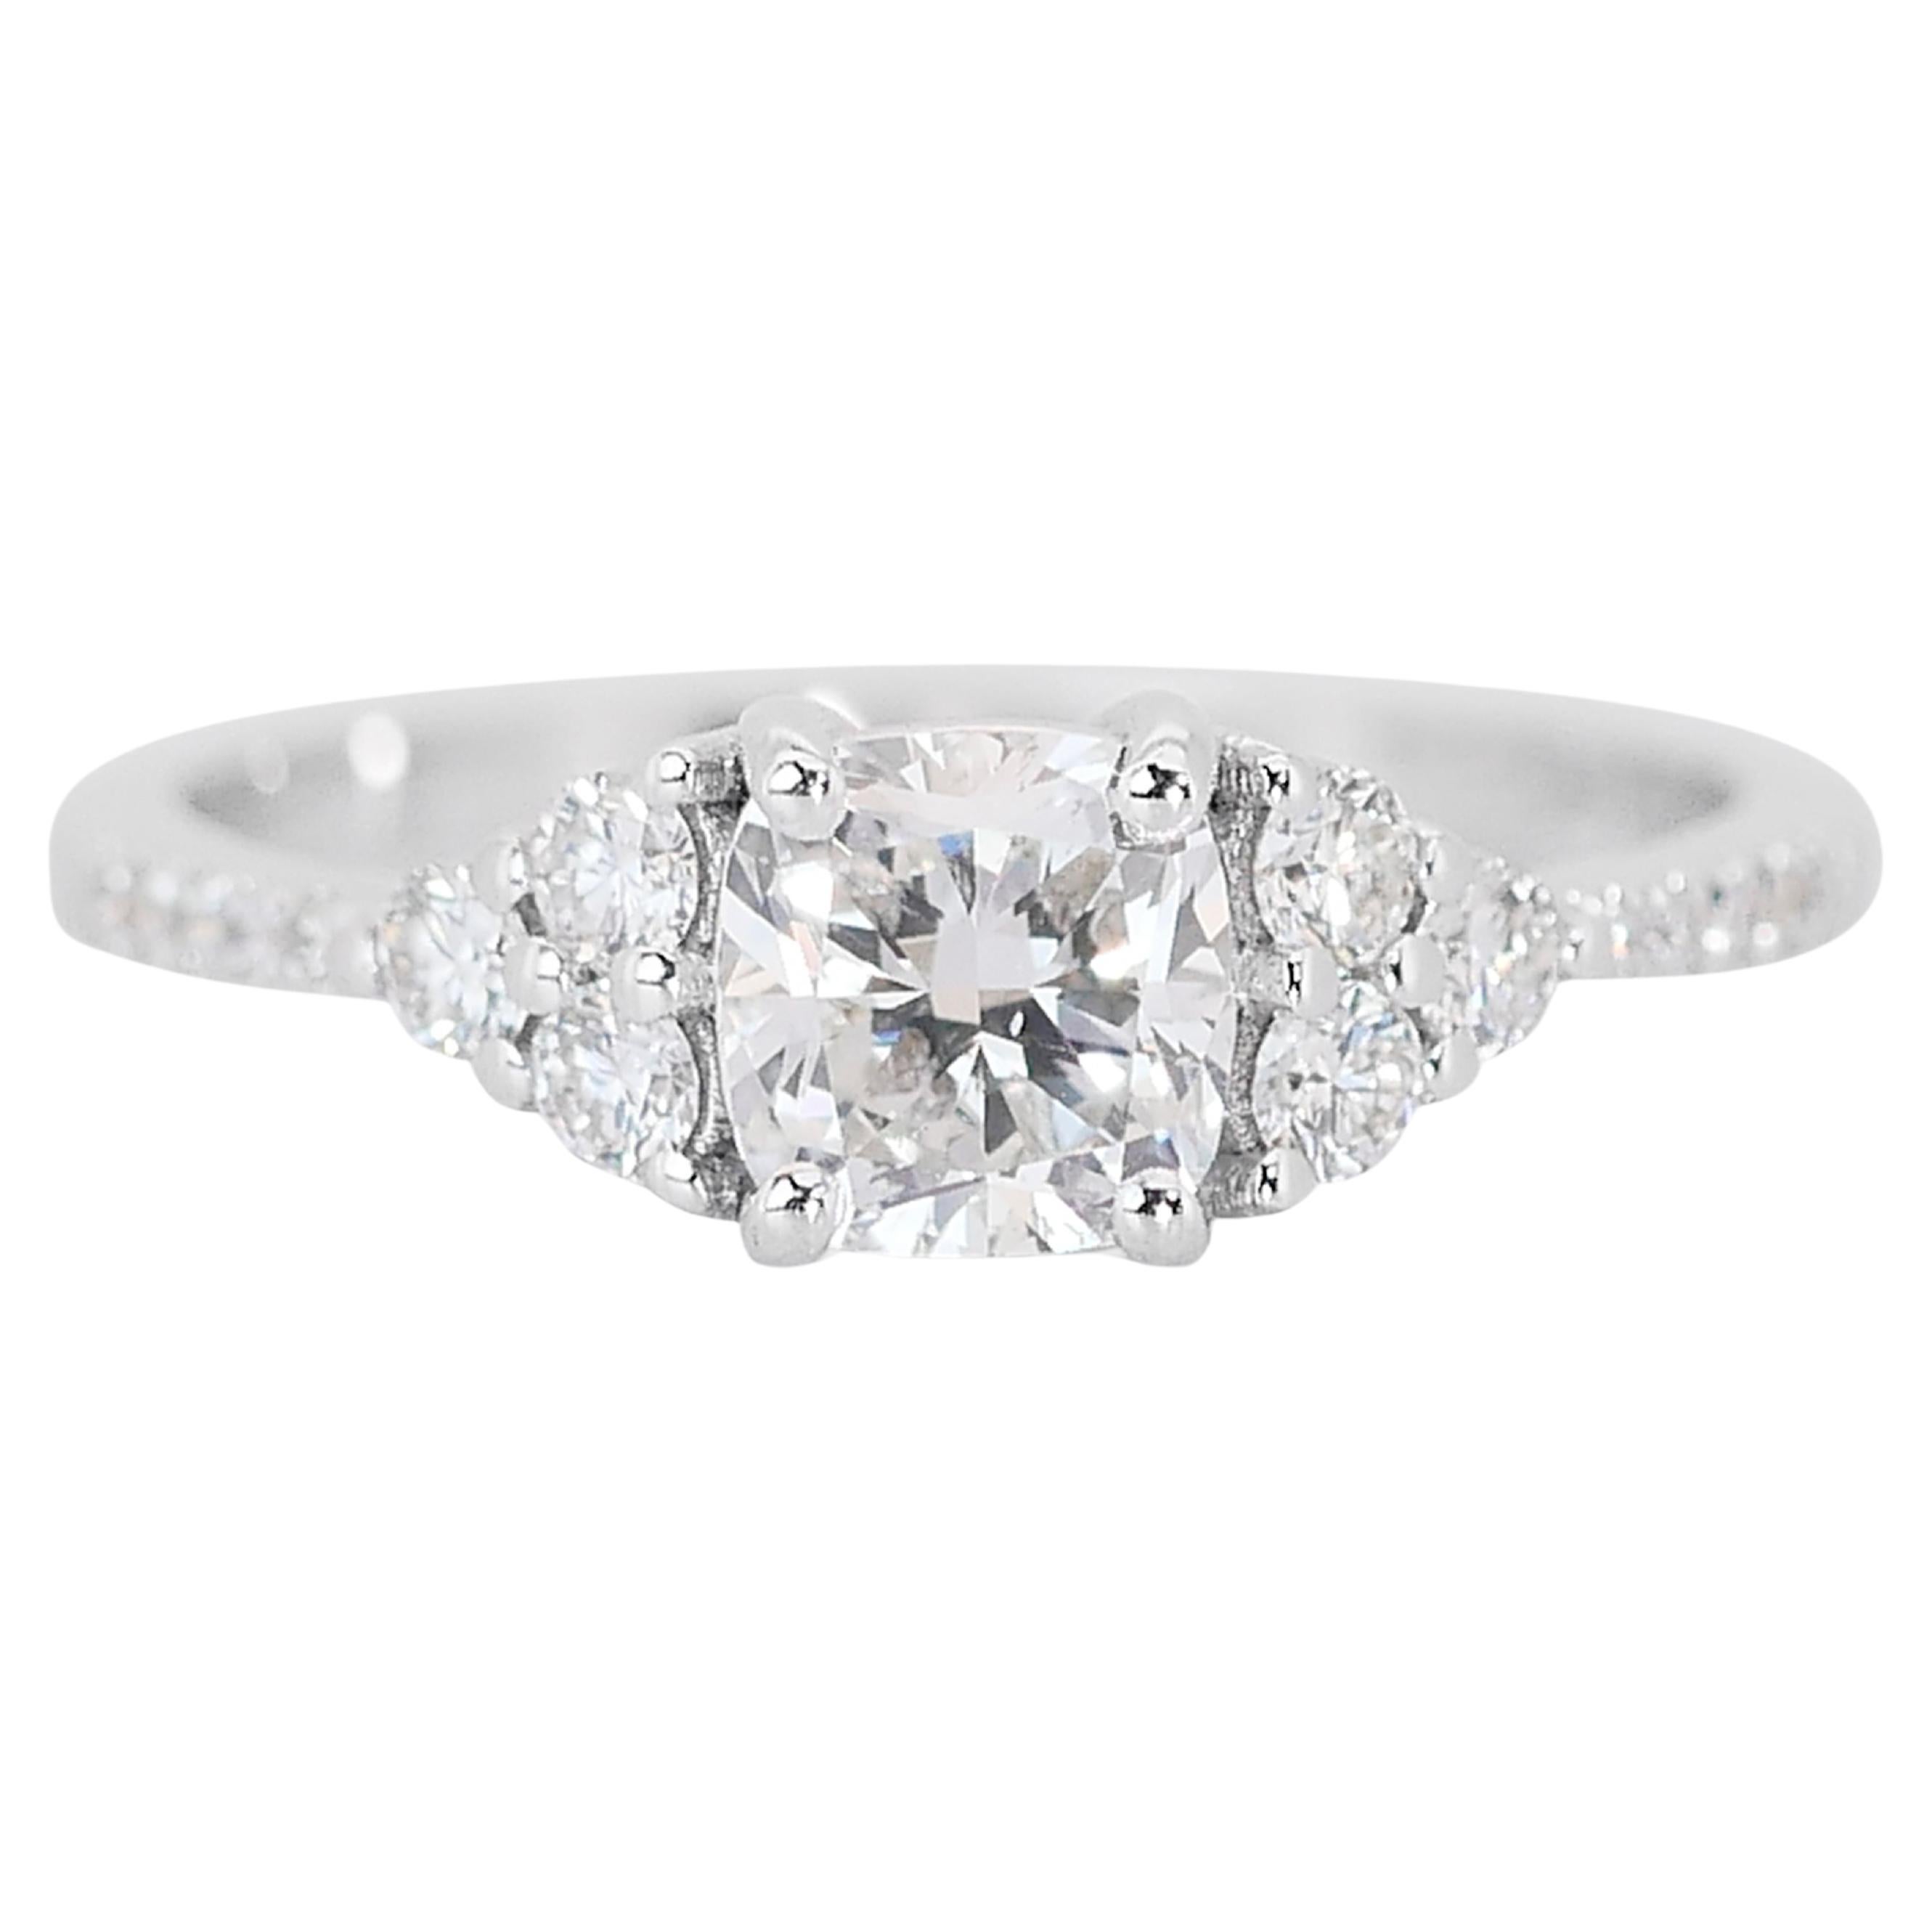 Magnificent 18k White Gold Natural Diamond Pave Ring w/1.30 ct -IGI Certified For Sale